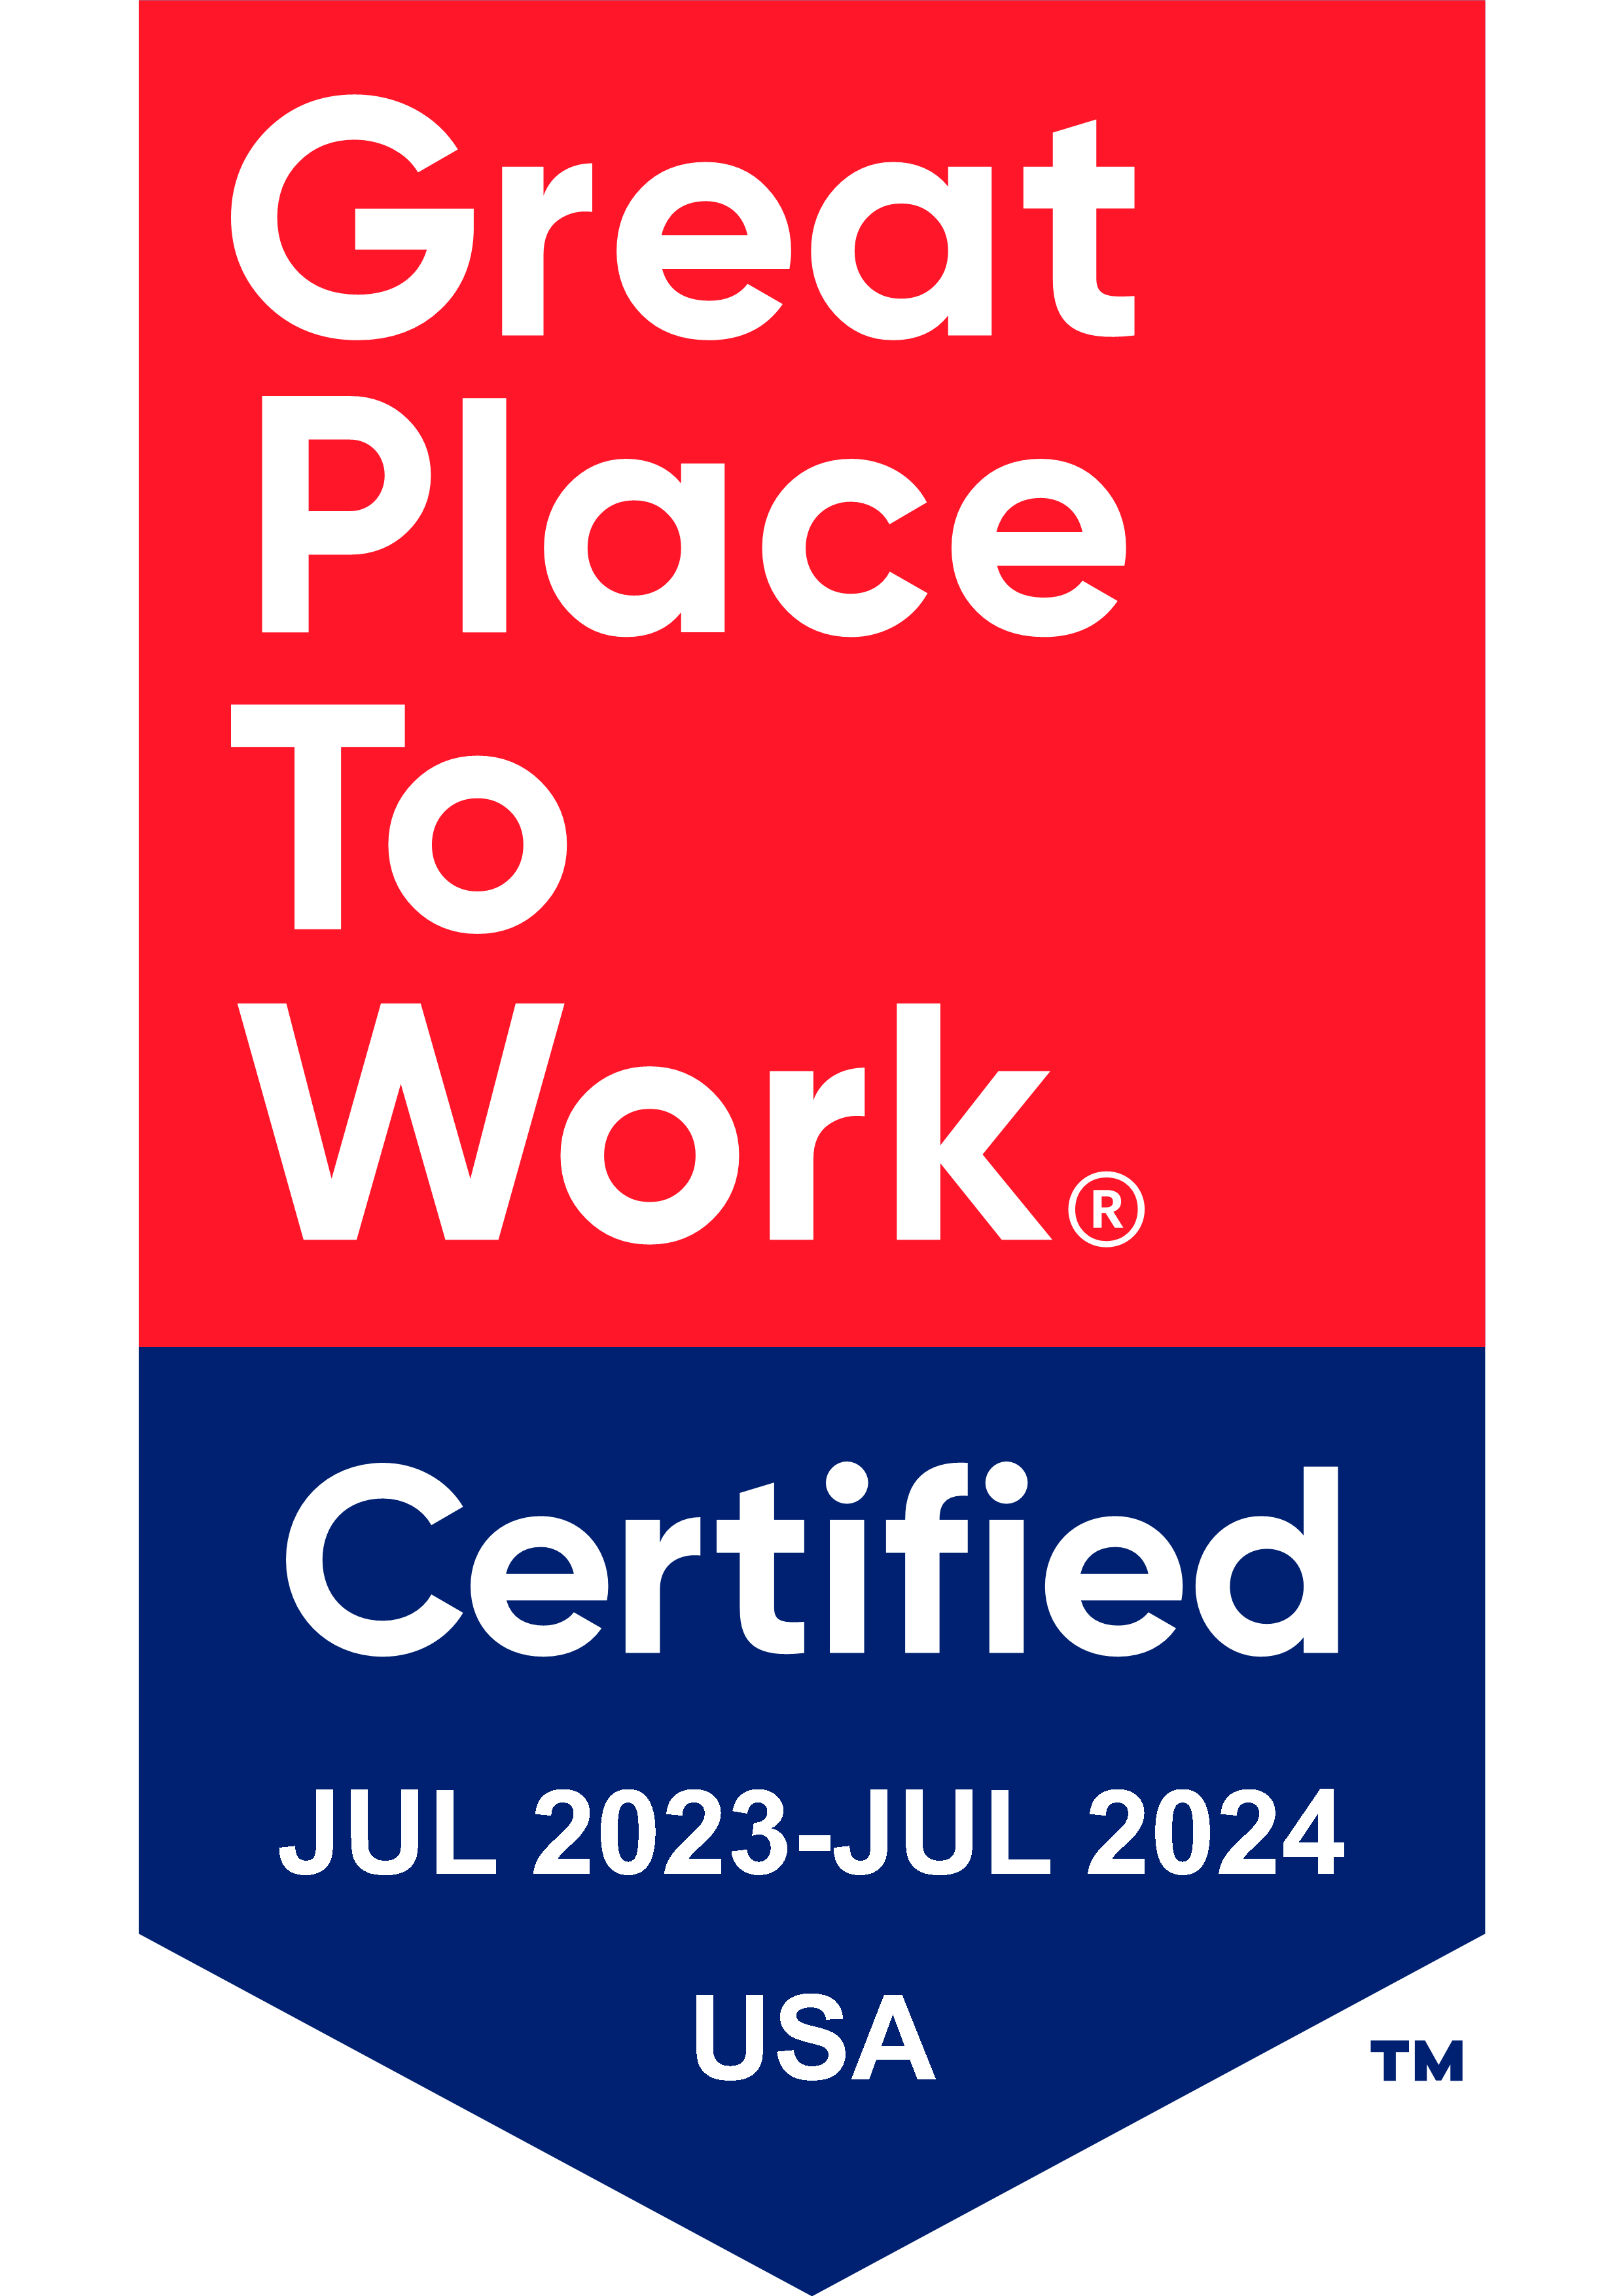 2023-2024 Great Place To Work Certified